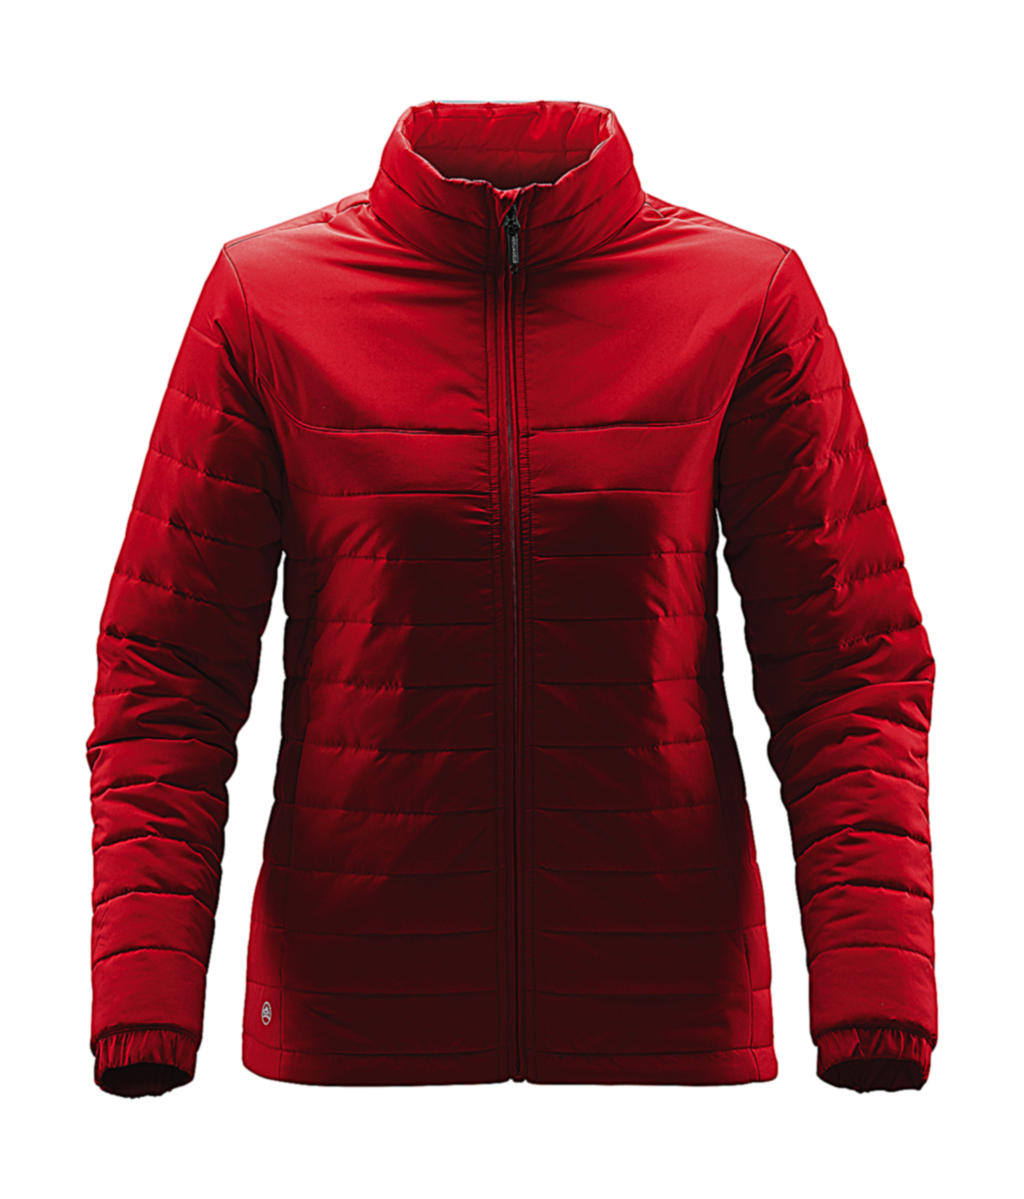  Womens Nautilus Thermal Jacket in Farbe Bright Red